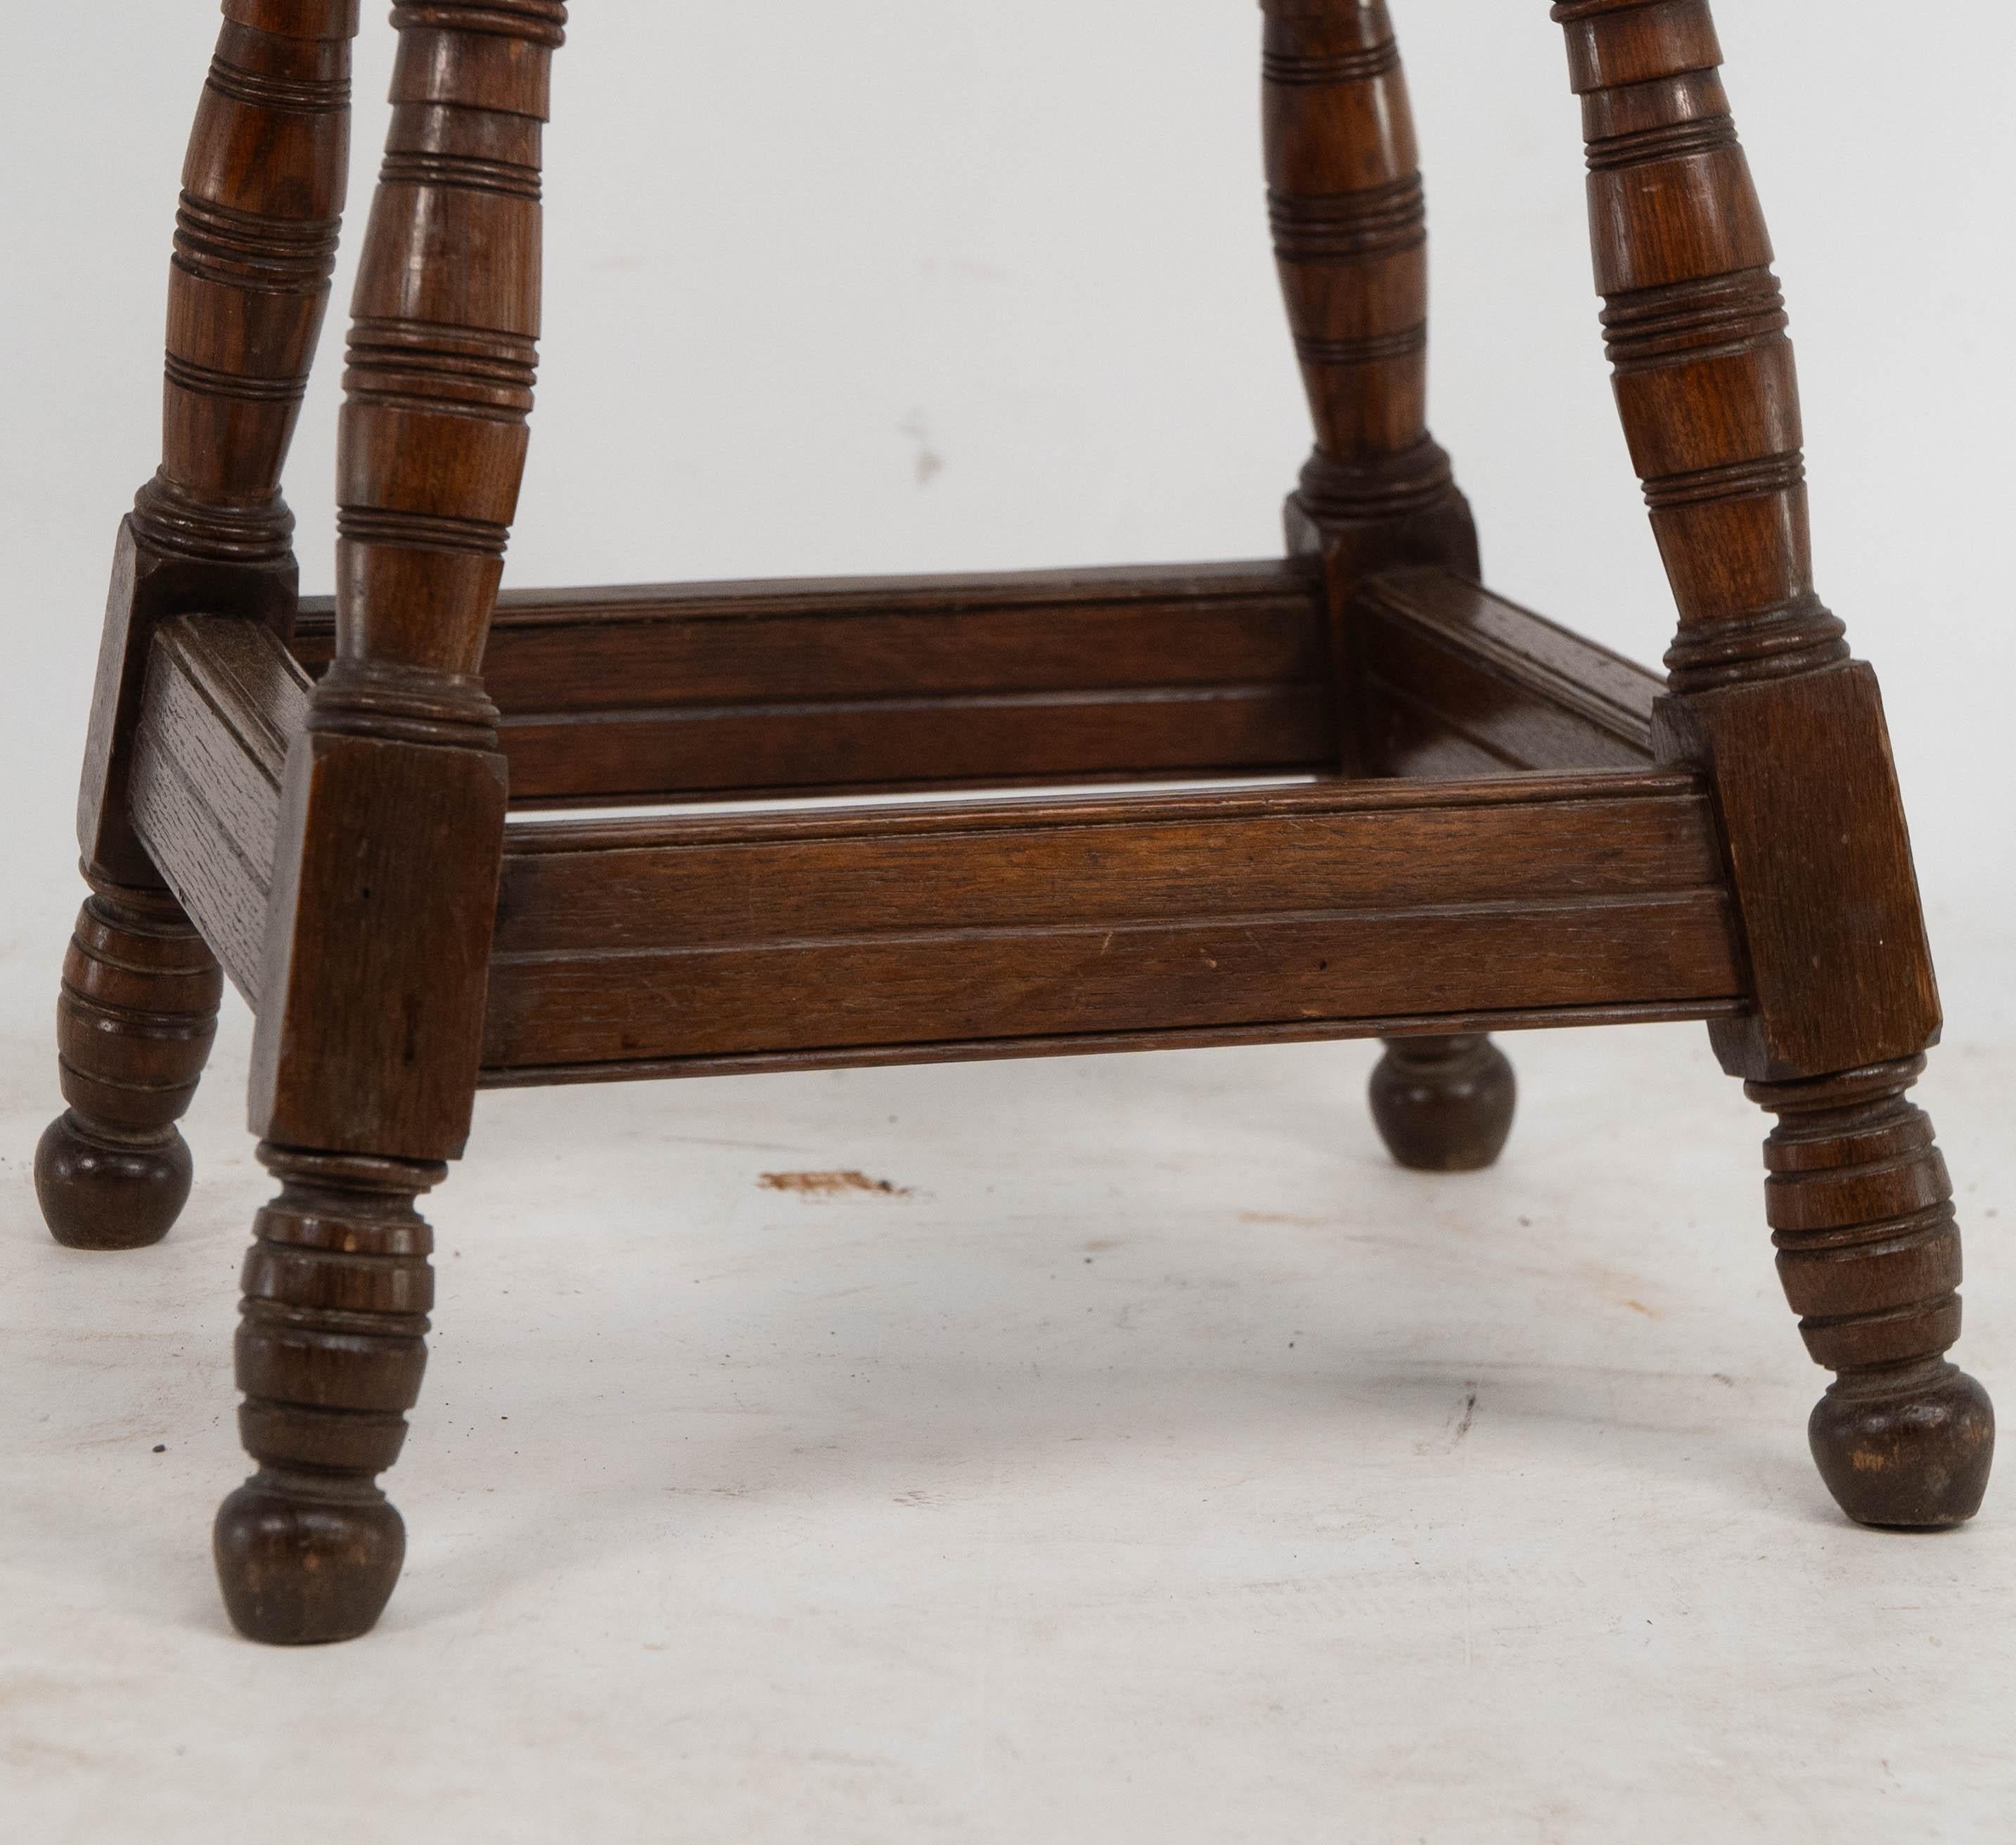 Collier and Plucknett. A rare Gothic Revival oak side table For Sale 5